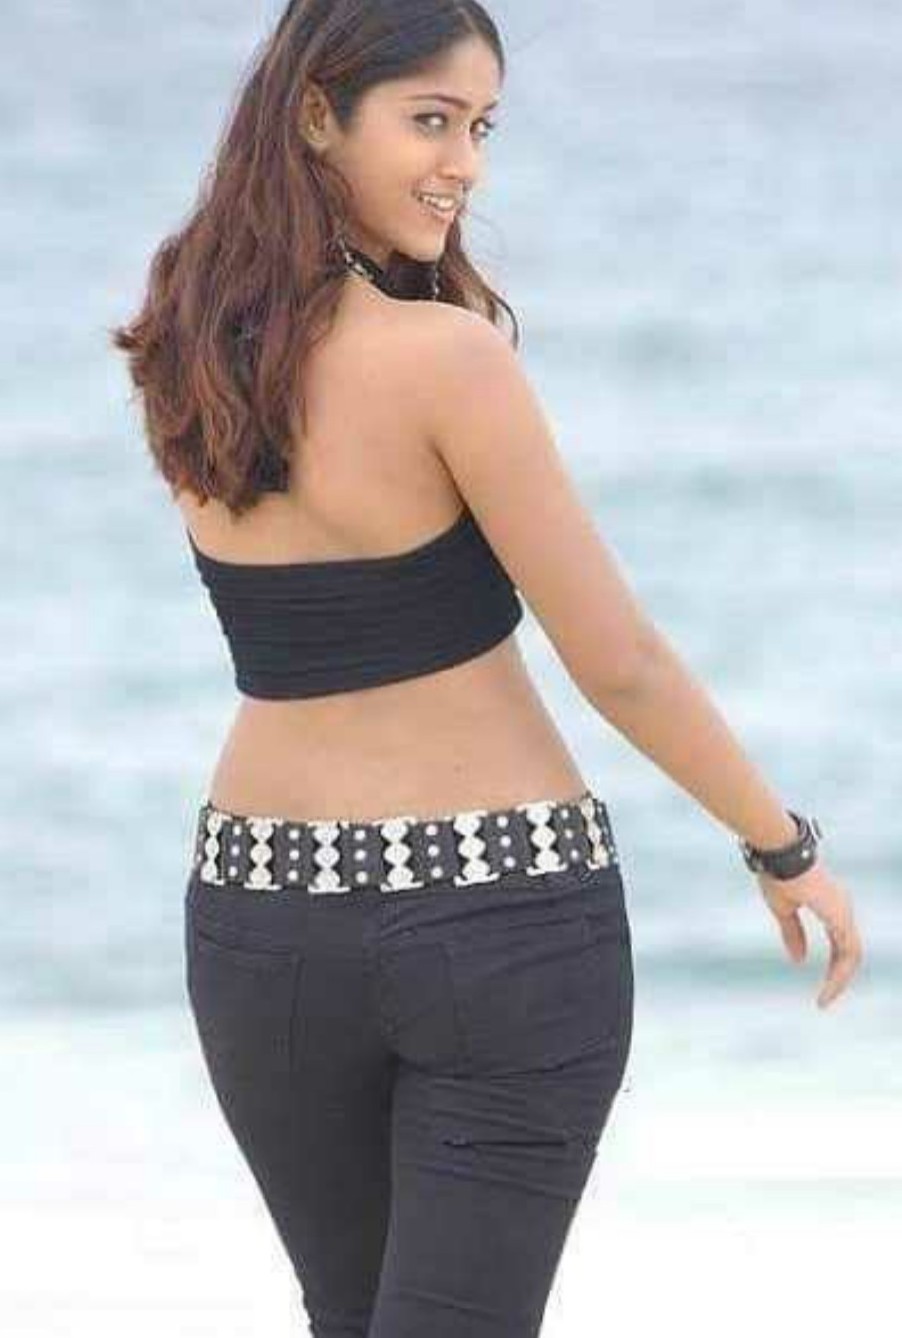 Checkout Hot Indian Actress Ileana Dcruz Super Sexy Legs And Cleavage Show In Black